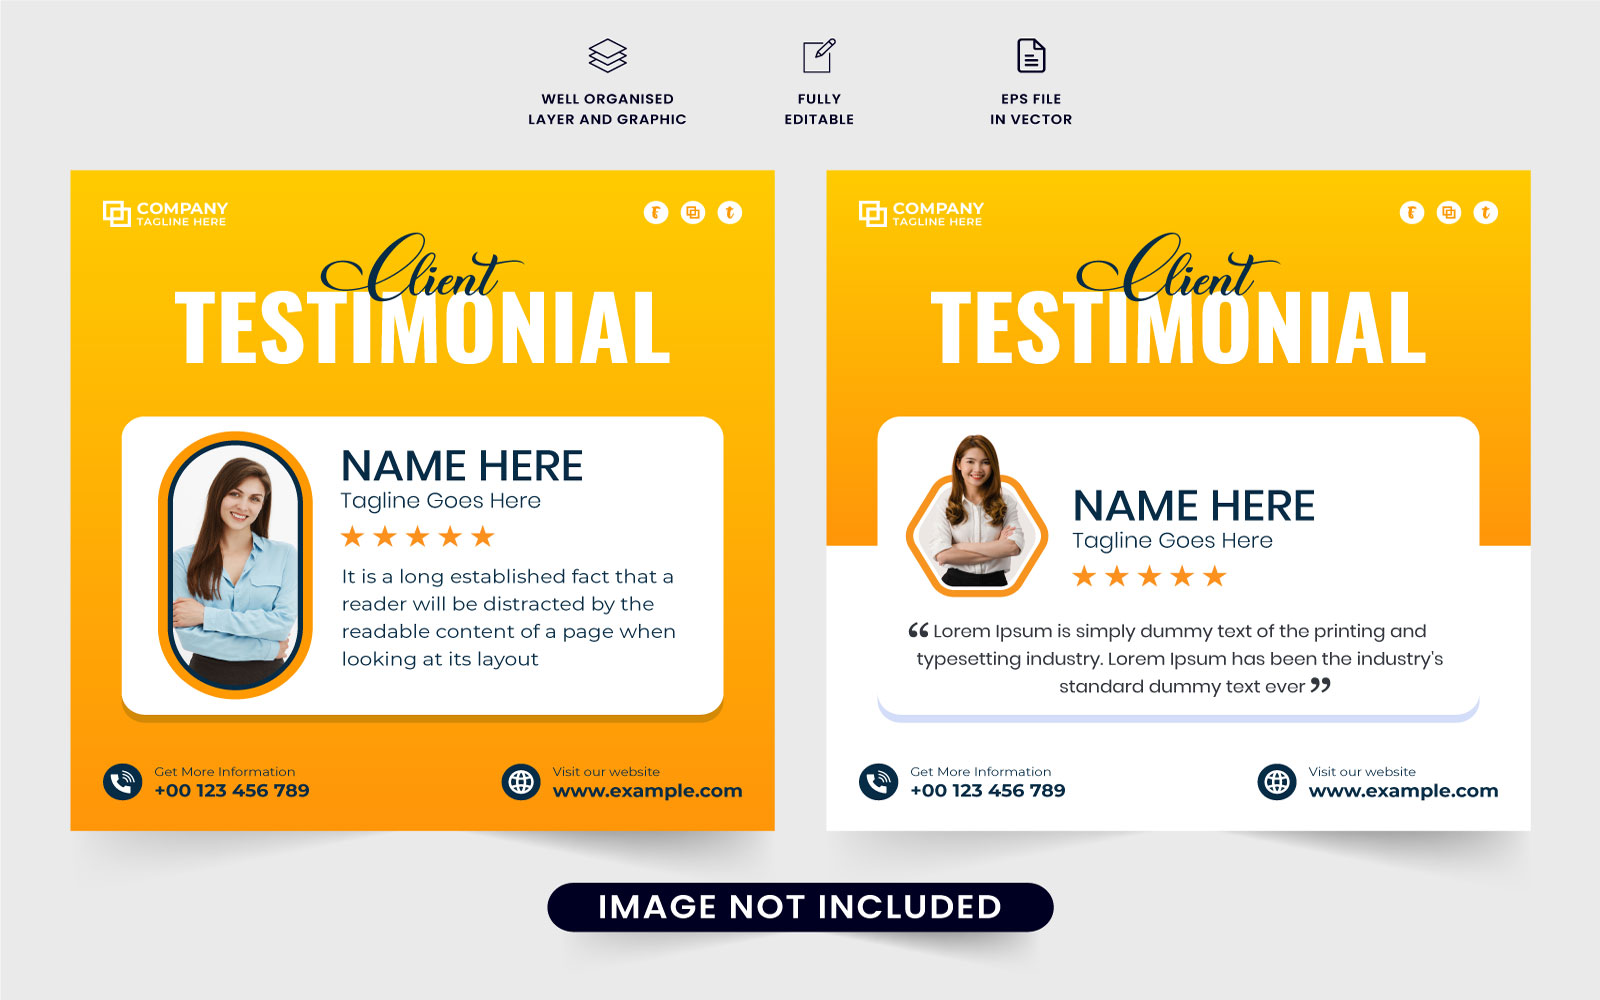 Client testimonial layout template vector